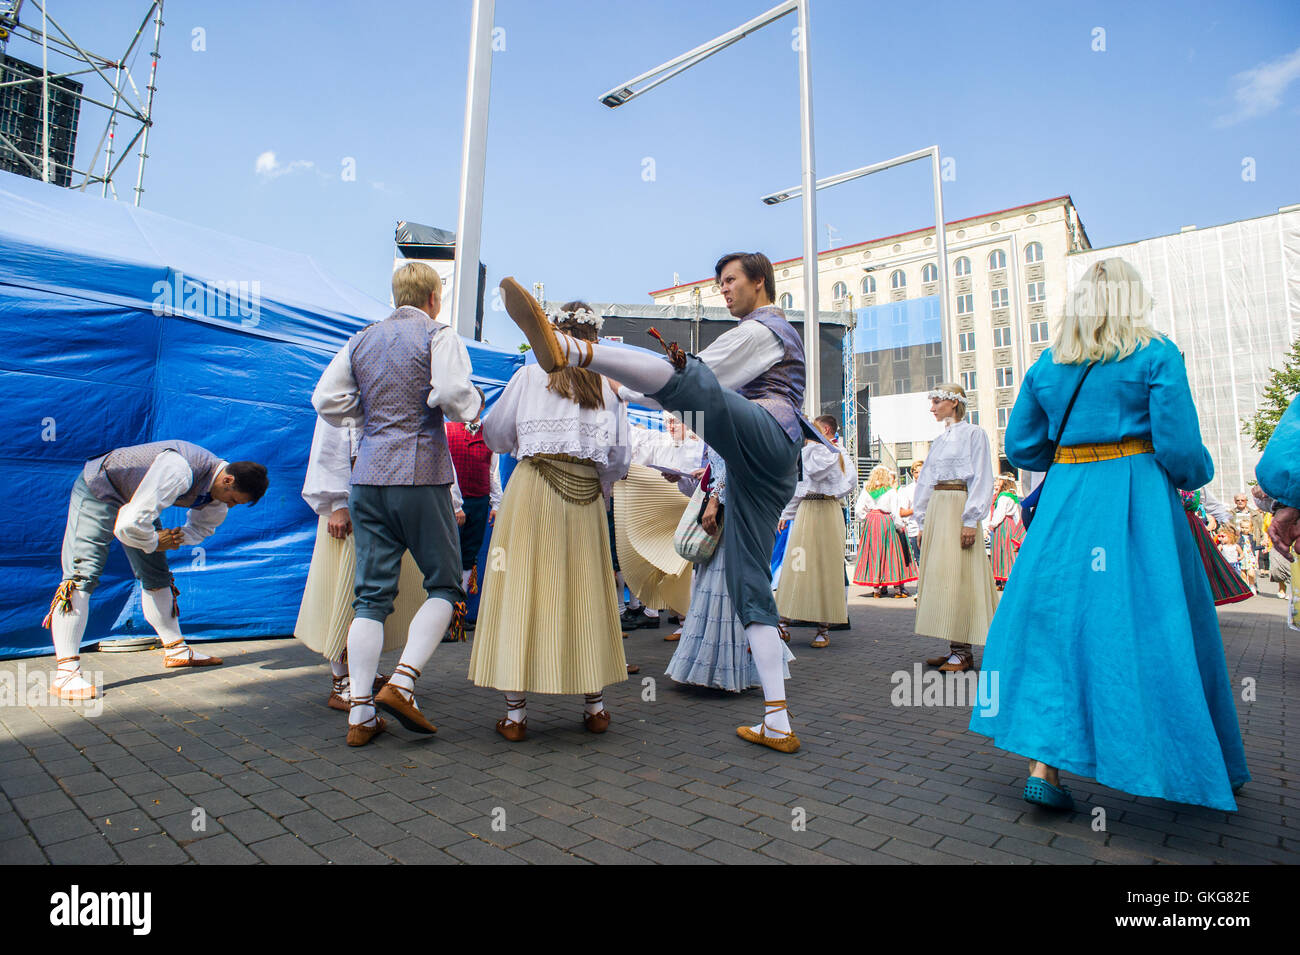 Tallinn, Estonia, 20th August 2016. Folkloric group prepares at the Freedom square of Tallinn. On 20th of August the Republic of Estonia celebrates the 25th years since the restoration of Independence after the collapse of the Soviet Union in 1991. Credit:  Nicolas Bouvy/Alamy Live News Stock Photo